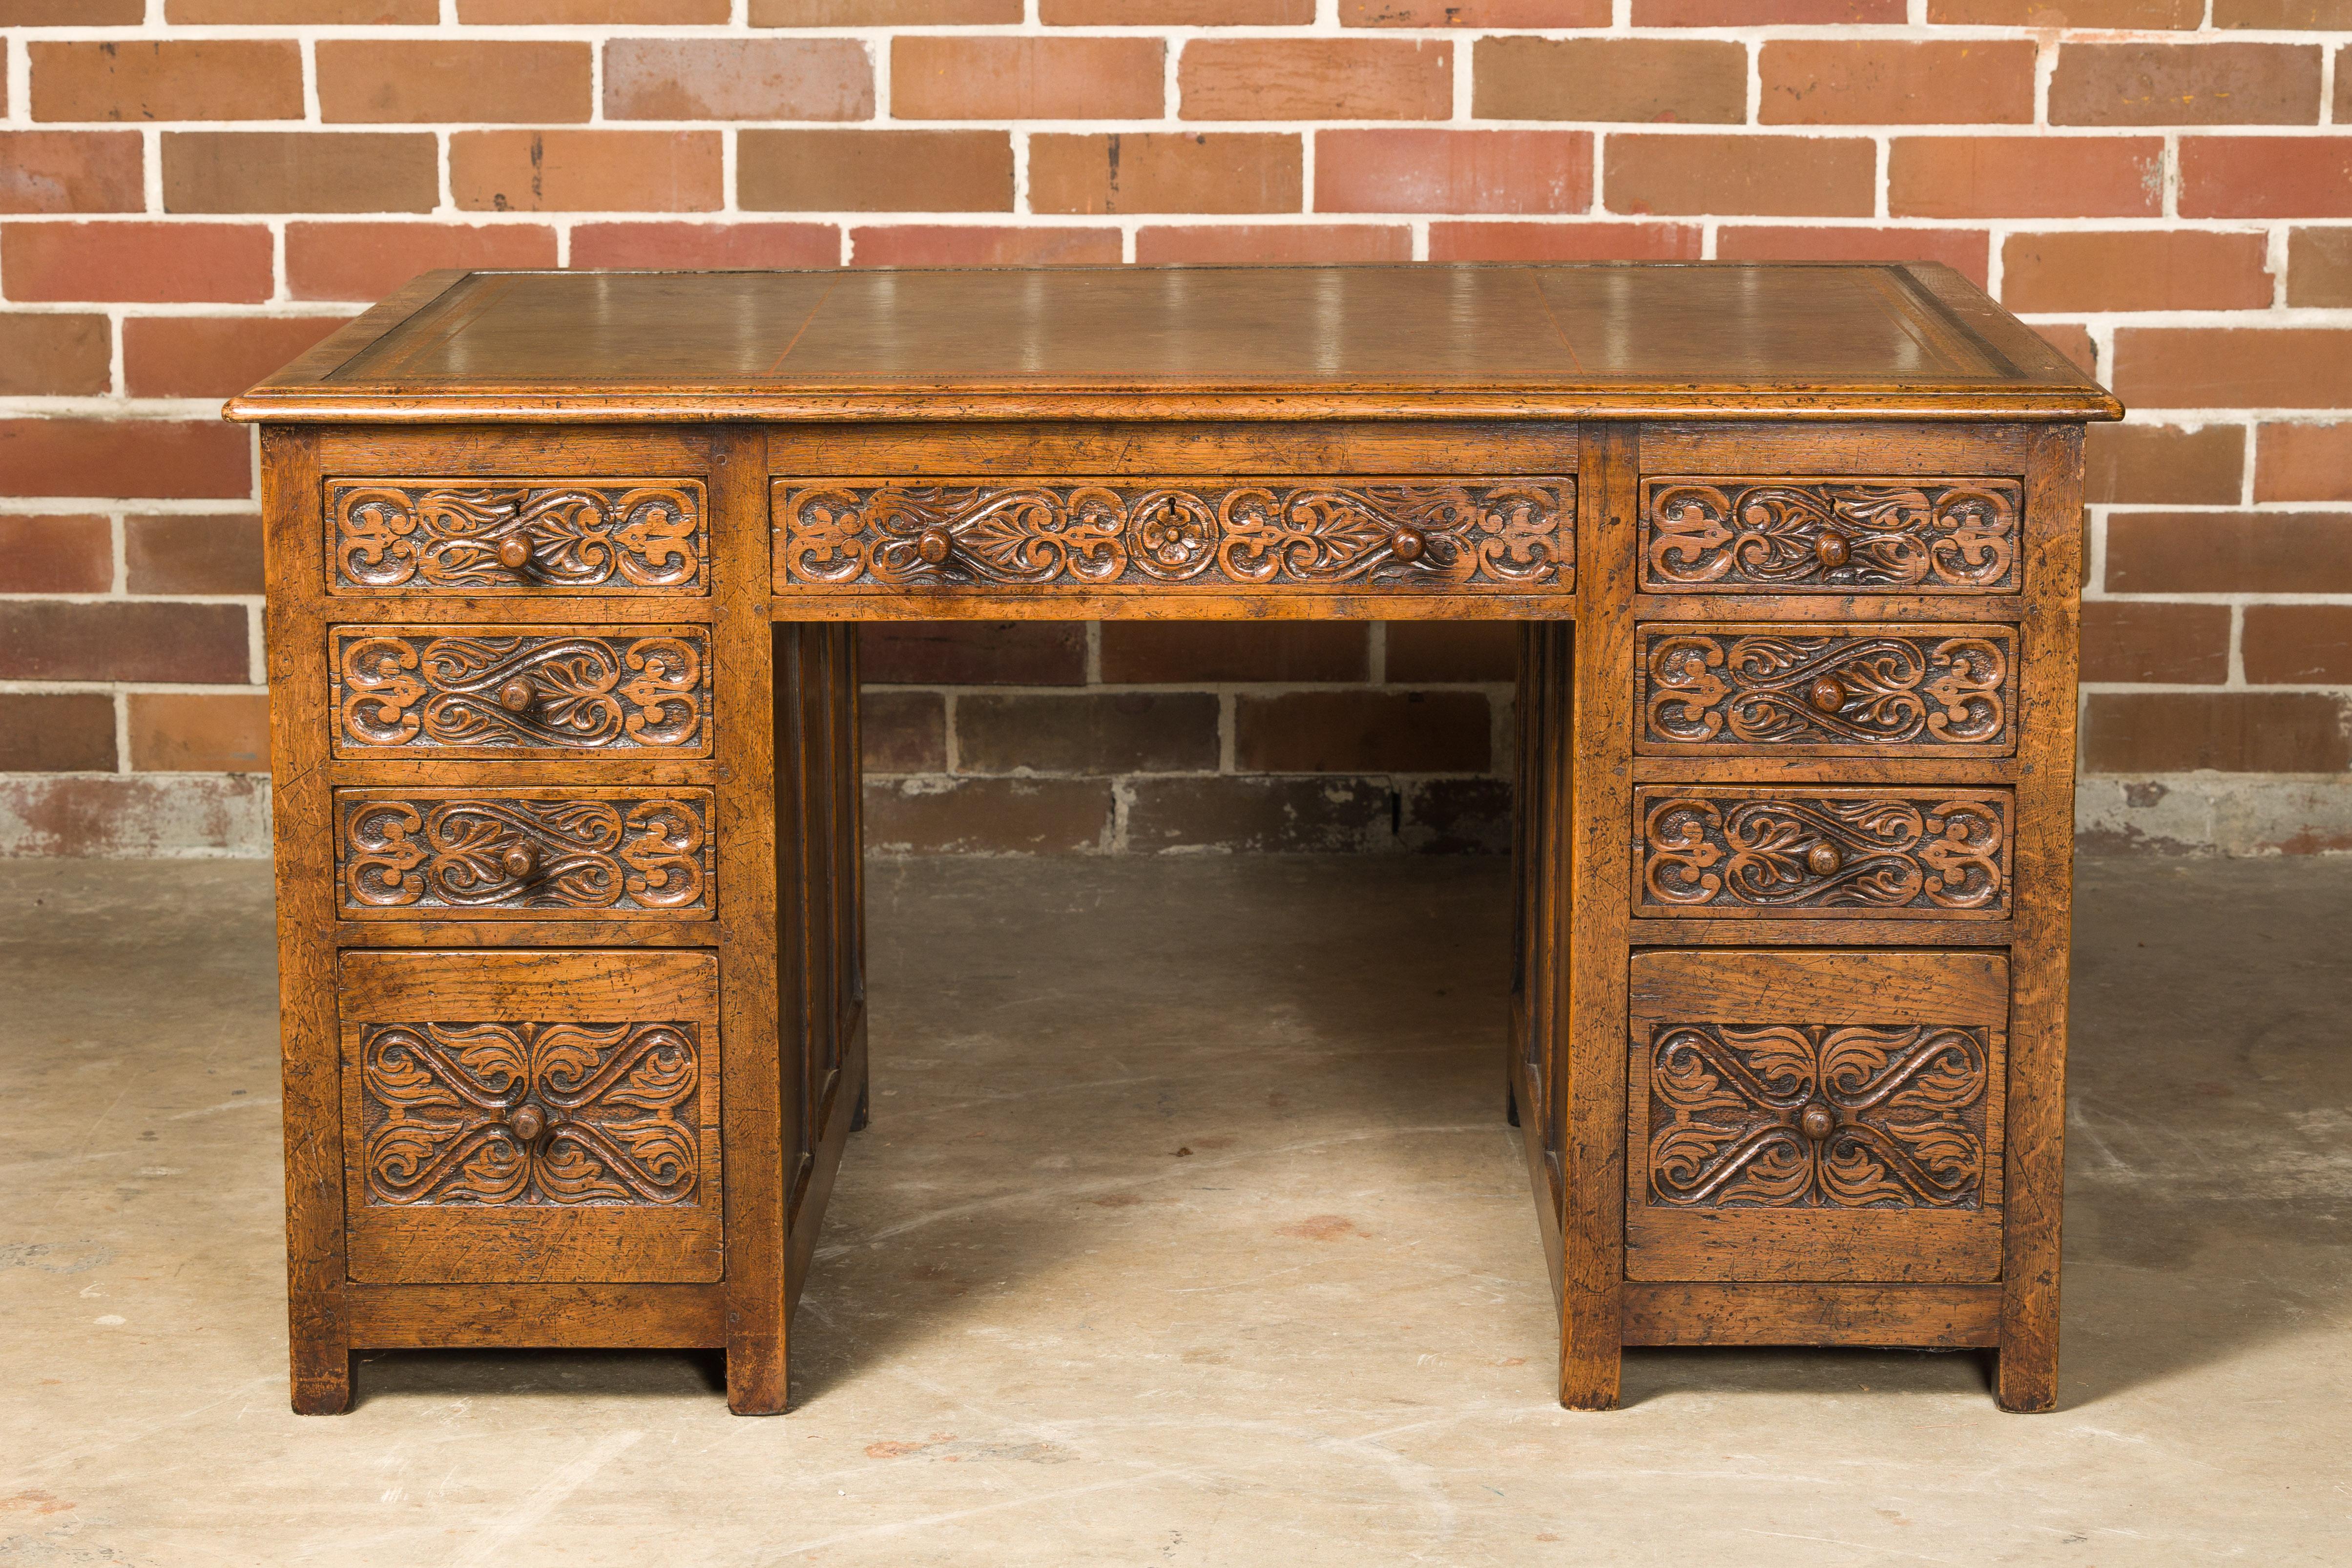 An English oak office kneehole desk from the 19th century, with green leather top, nine drawers and carved foliage décor. Enrich your home office with the enduring elegance of this English oak office kneehole desk from the 19th century. Its grand